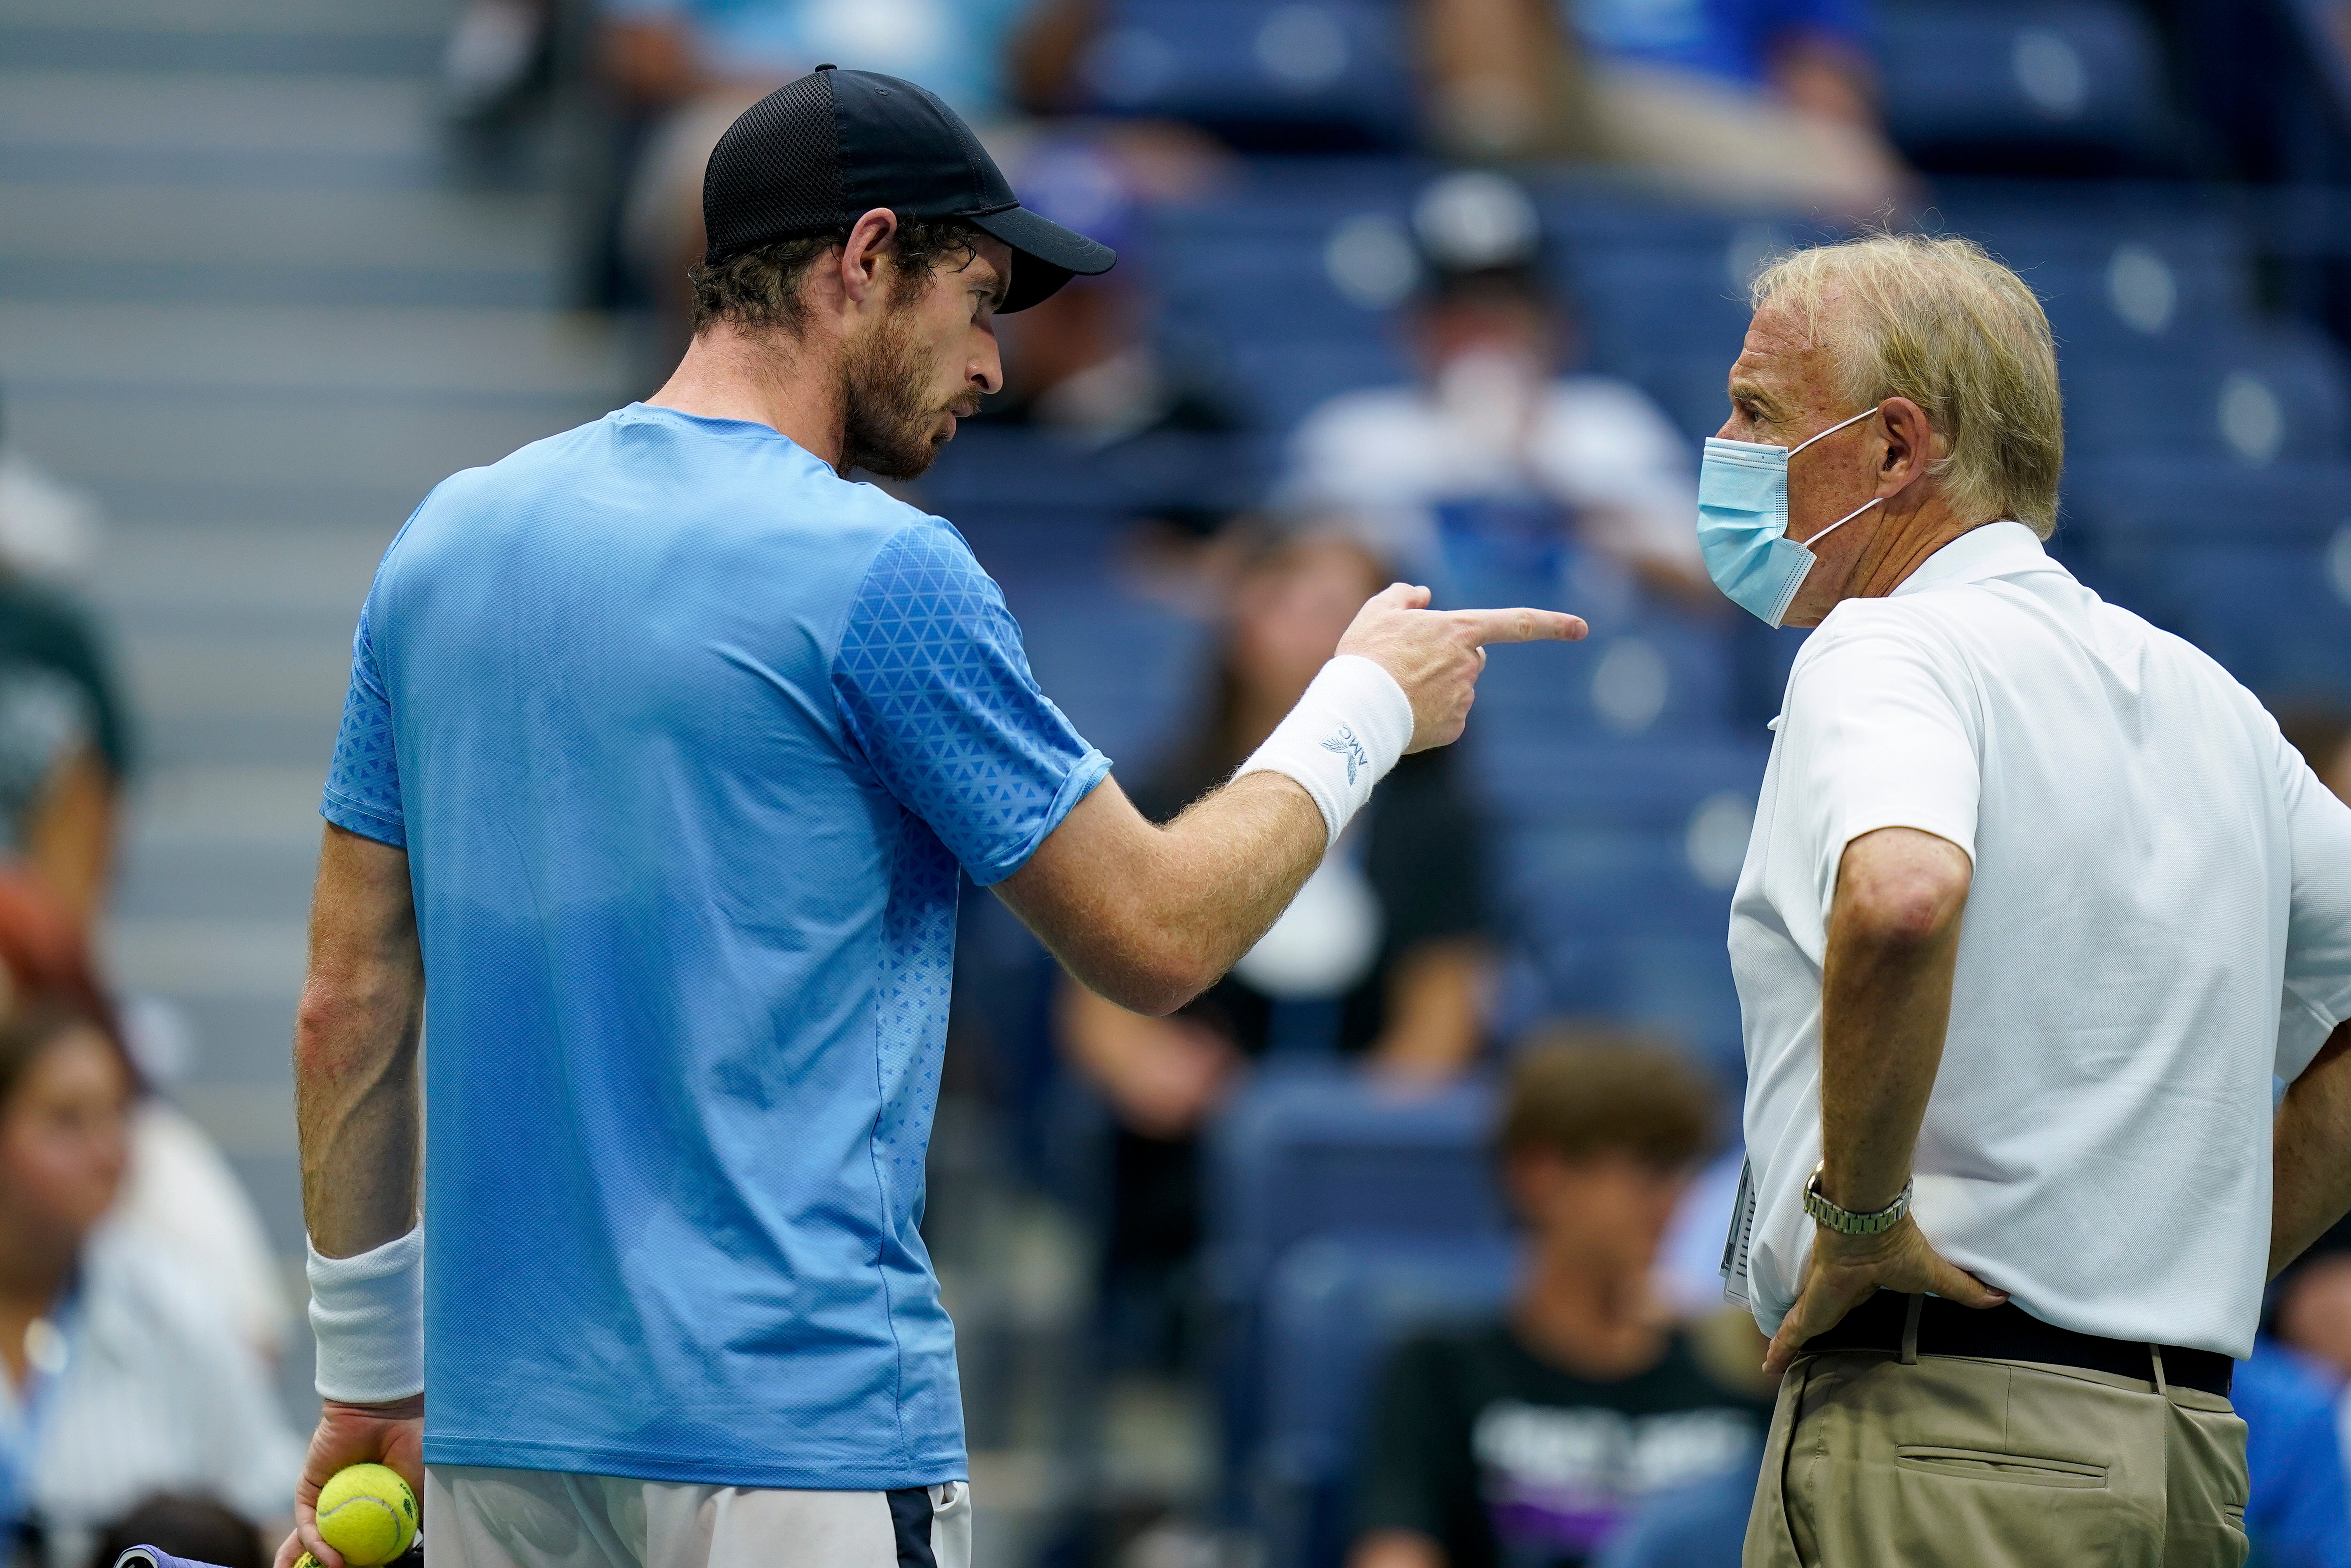 Andy Murray complains to an official